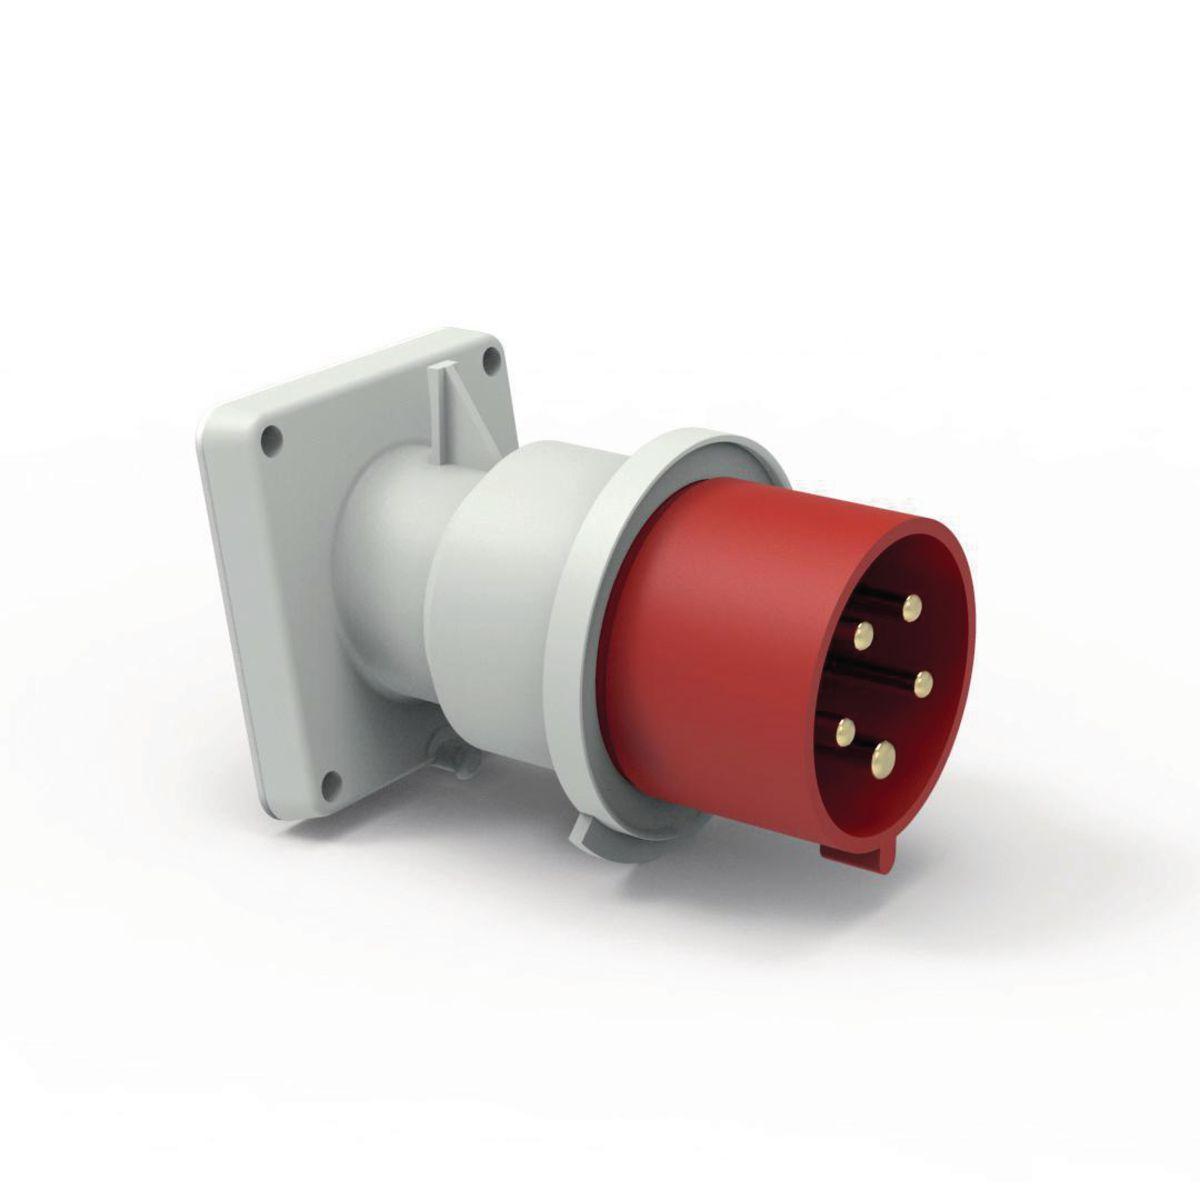 Hubbell C560B7SA Heavy Duty Products, IEC Pin and Sleeve Devices, Hubbell-PRO, Male, Inlet, 60 A  277/480 VAC, 4-POLE 5-WIRE, Red, Splash Proof  ; IP44 environmental ratings ; Impact and corrosion resistant insulated non-metallic housing ; Sequential contact engagement to